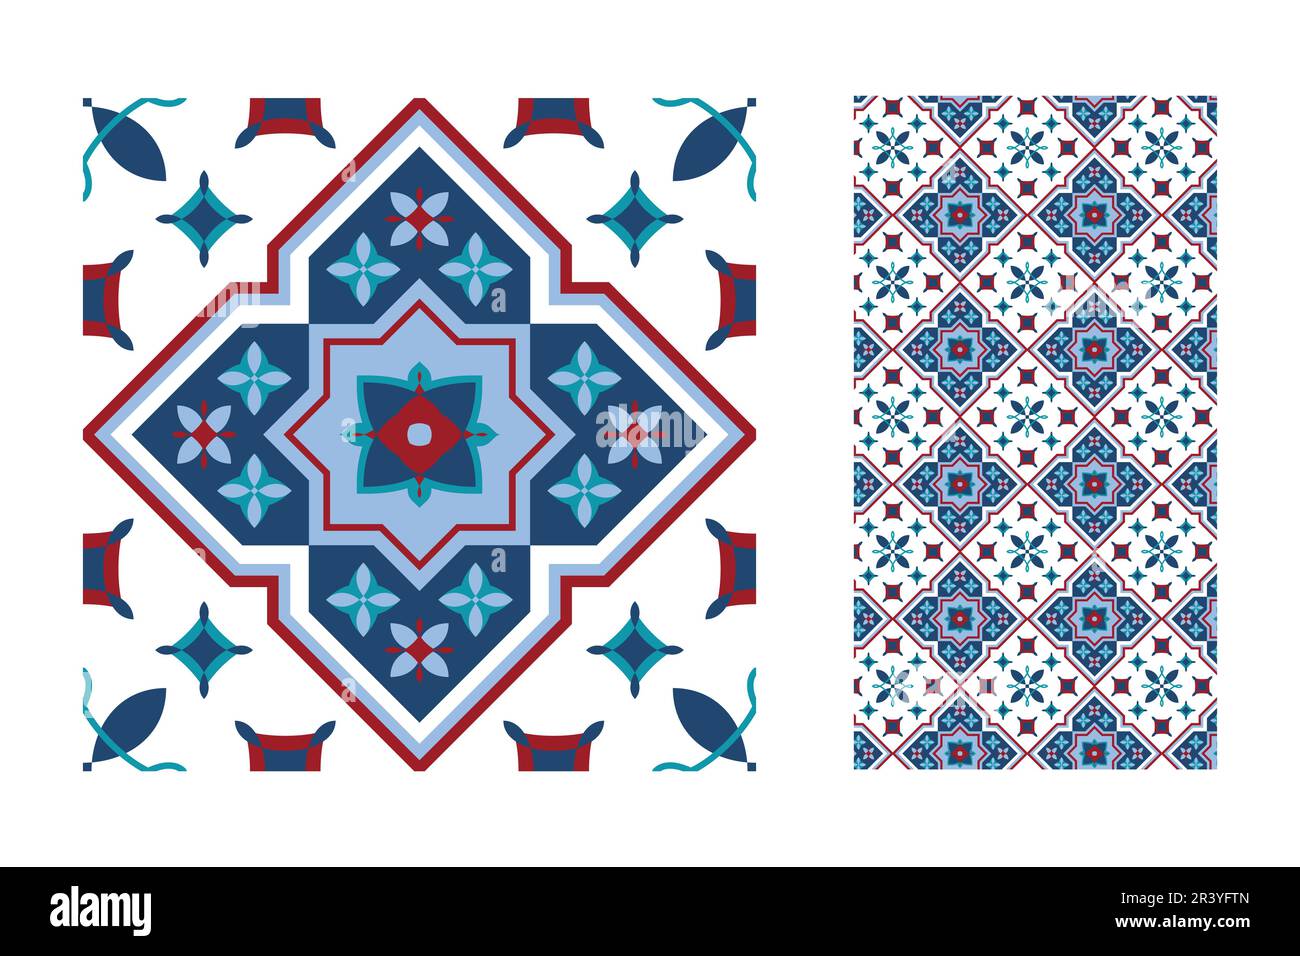 Islamic tiles background textures. Decorative colored ceramic tile. Colorful design. Set of seamless vector patterns. Stock Vector